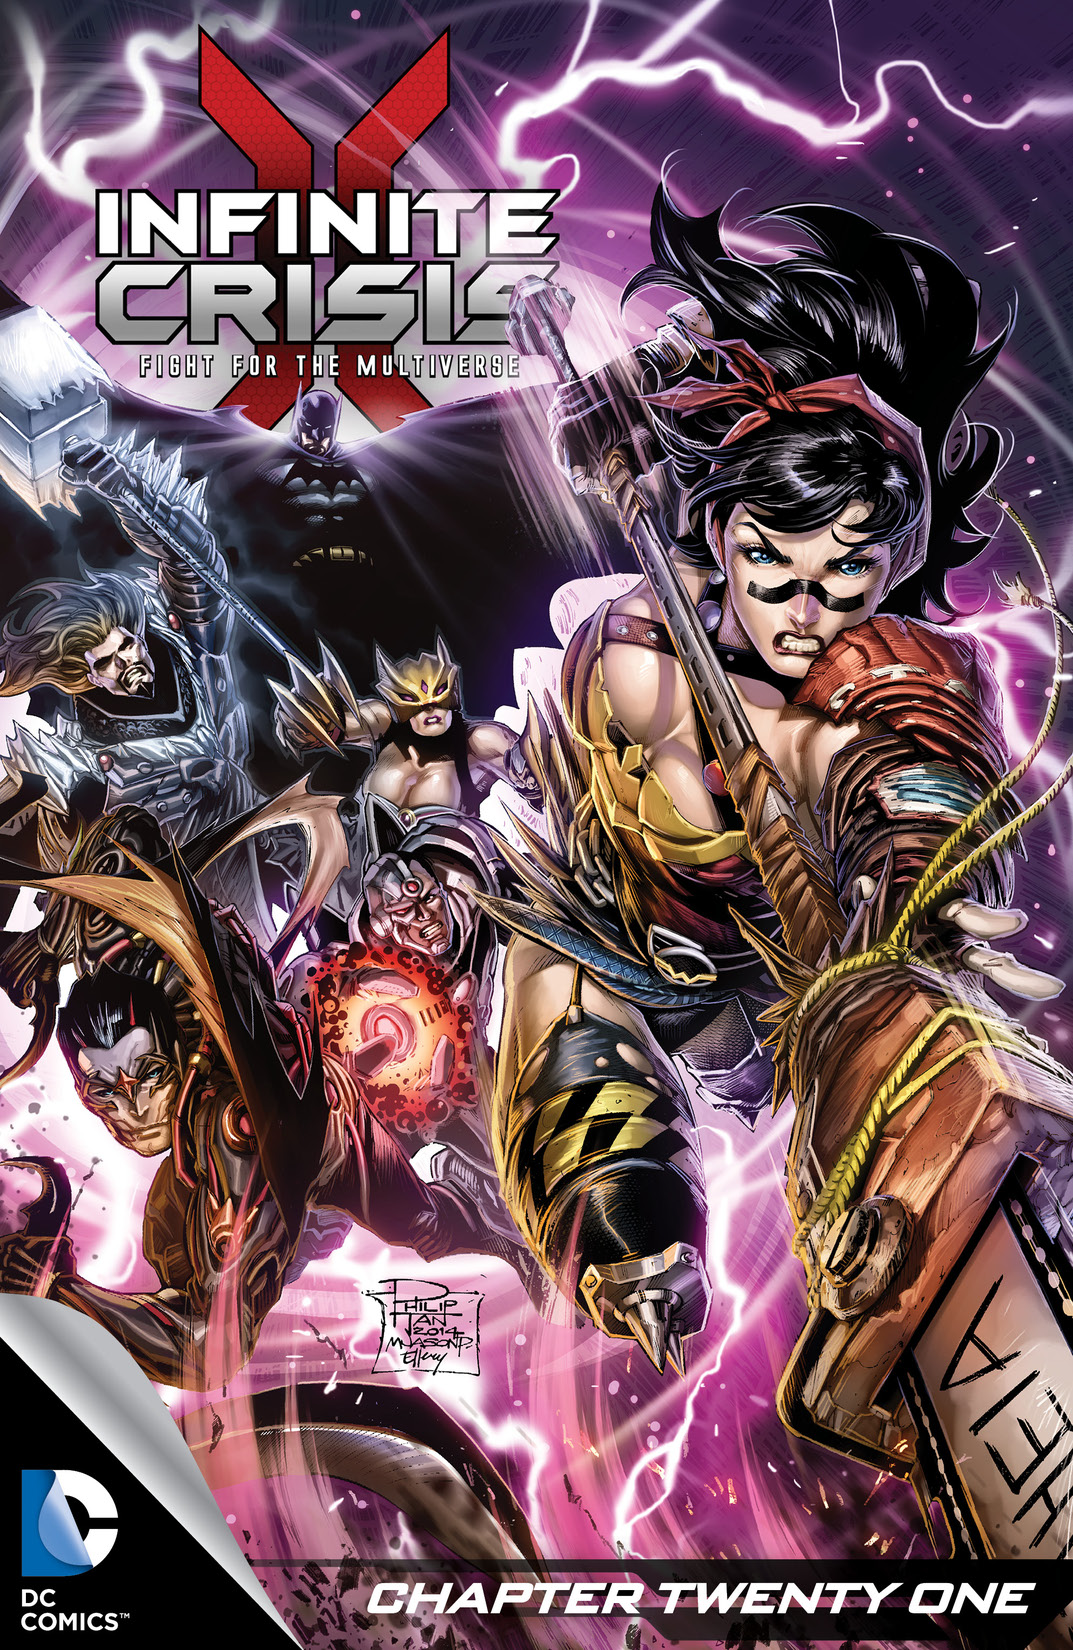 Infinite Crisis: Fight for the Multiverse #21 preview images